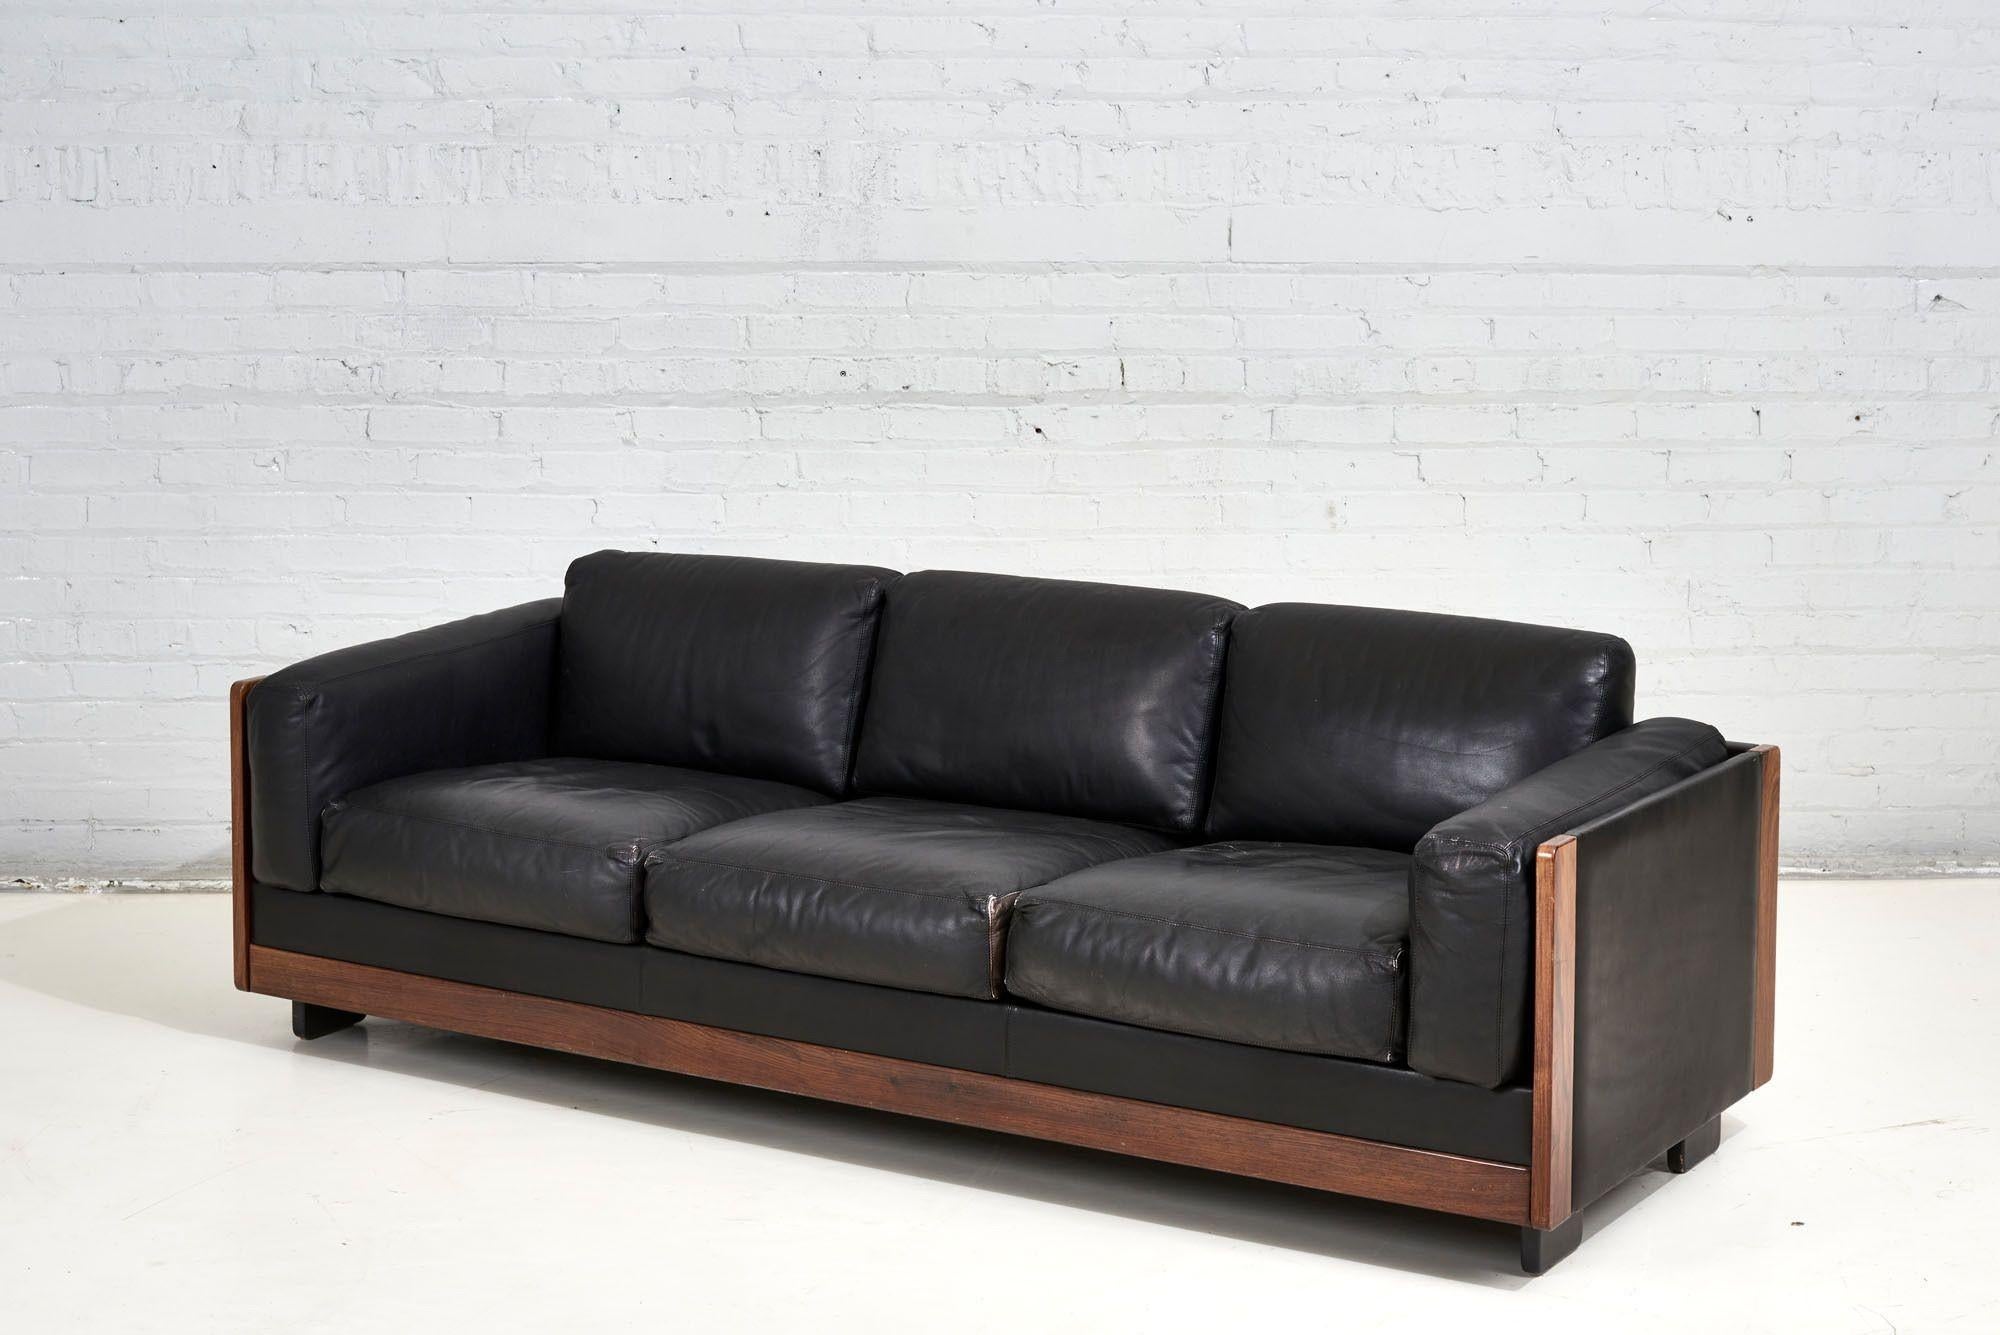 Mid-Century Modern Black Leathe/Rosewood “920 Sofa”, Afra & Tobia Scarpa for Cassina, Italy 1960 For Sale